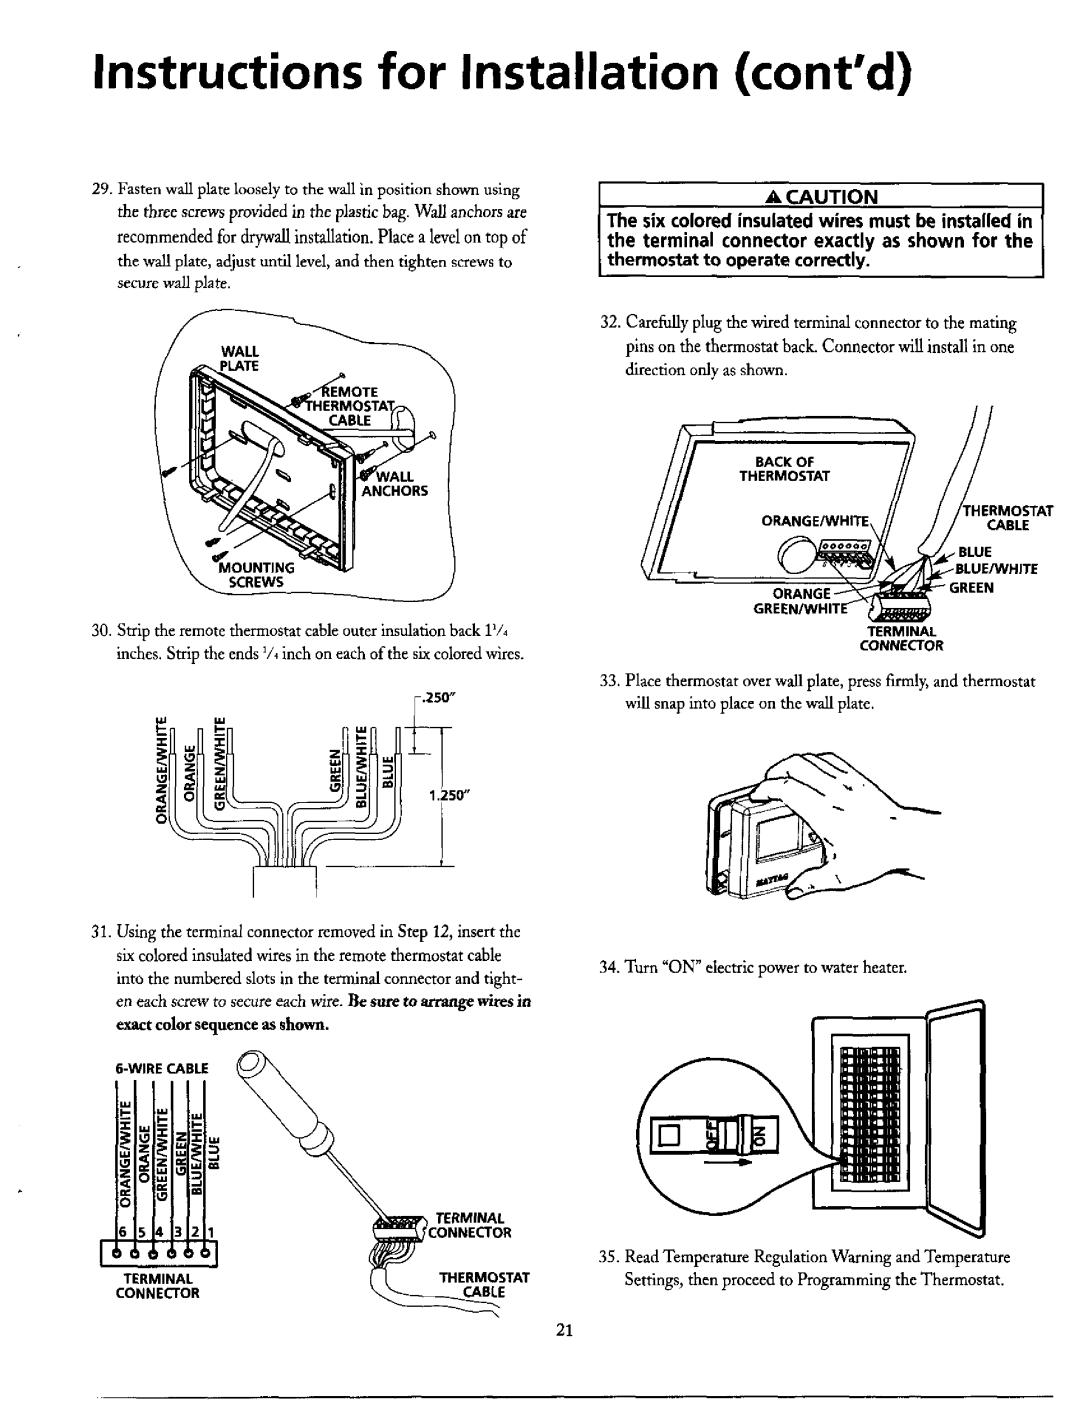 Maytag HE21282PC O.Nge/Wh,Tet.E--O T, Instructions for Installation contd, Wall, Screws, 250, I . , Connector, Terminal 